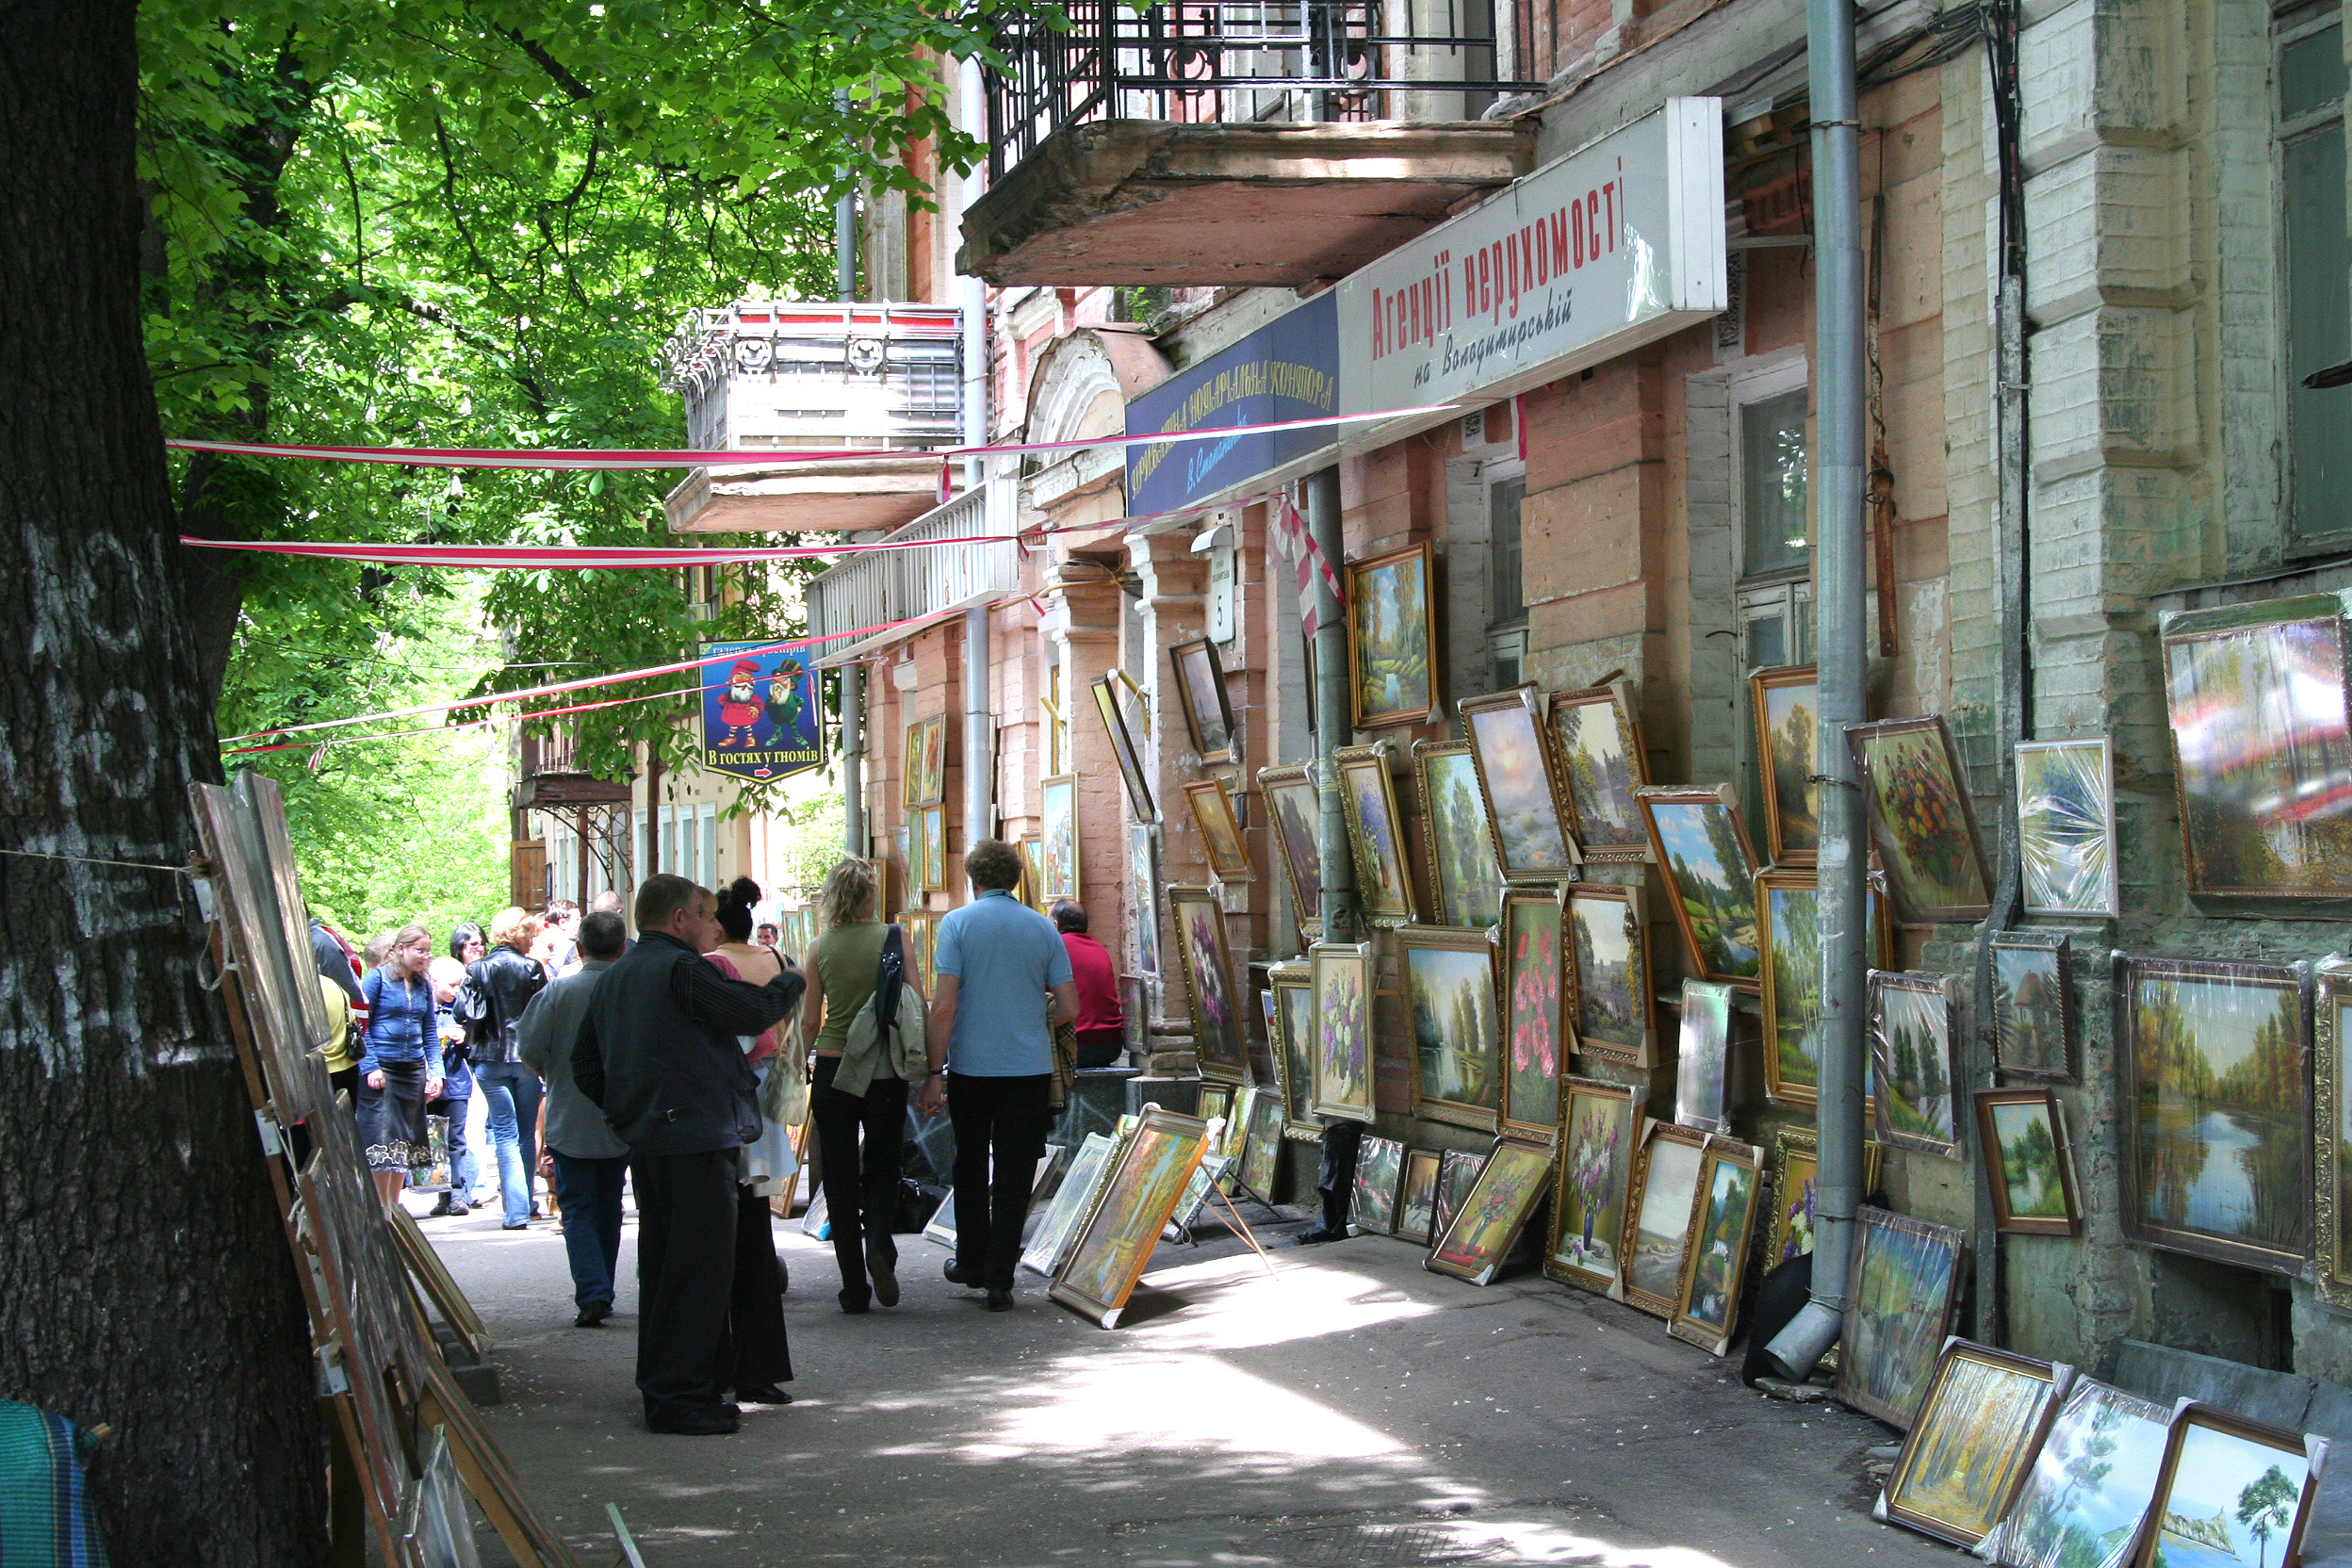 St. Andrews Descent is the Montmartre of Kiev, where artists display their talents.